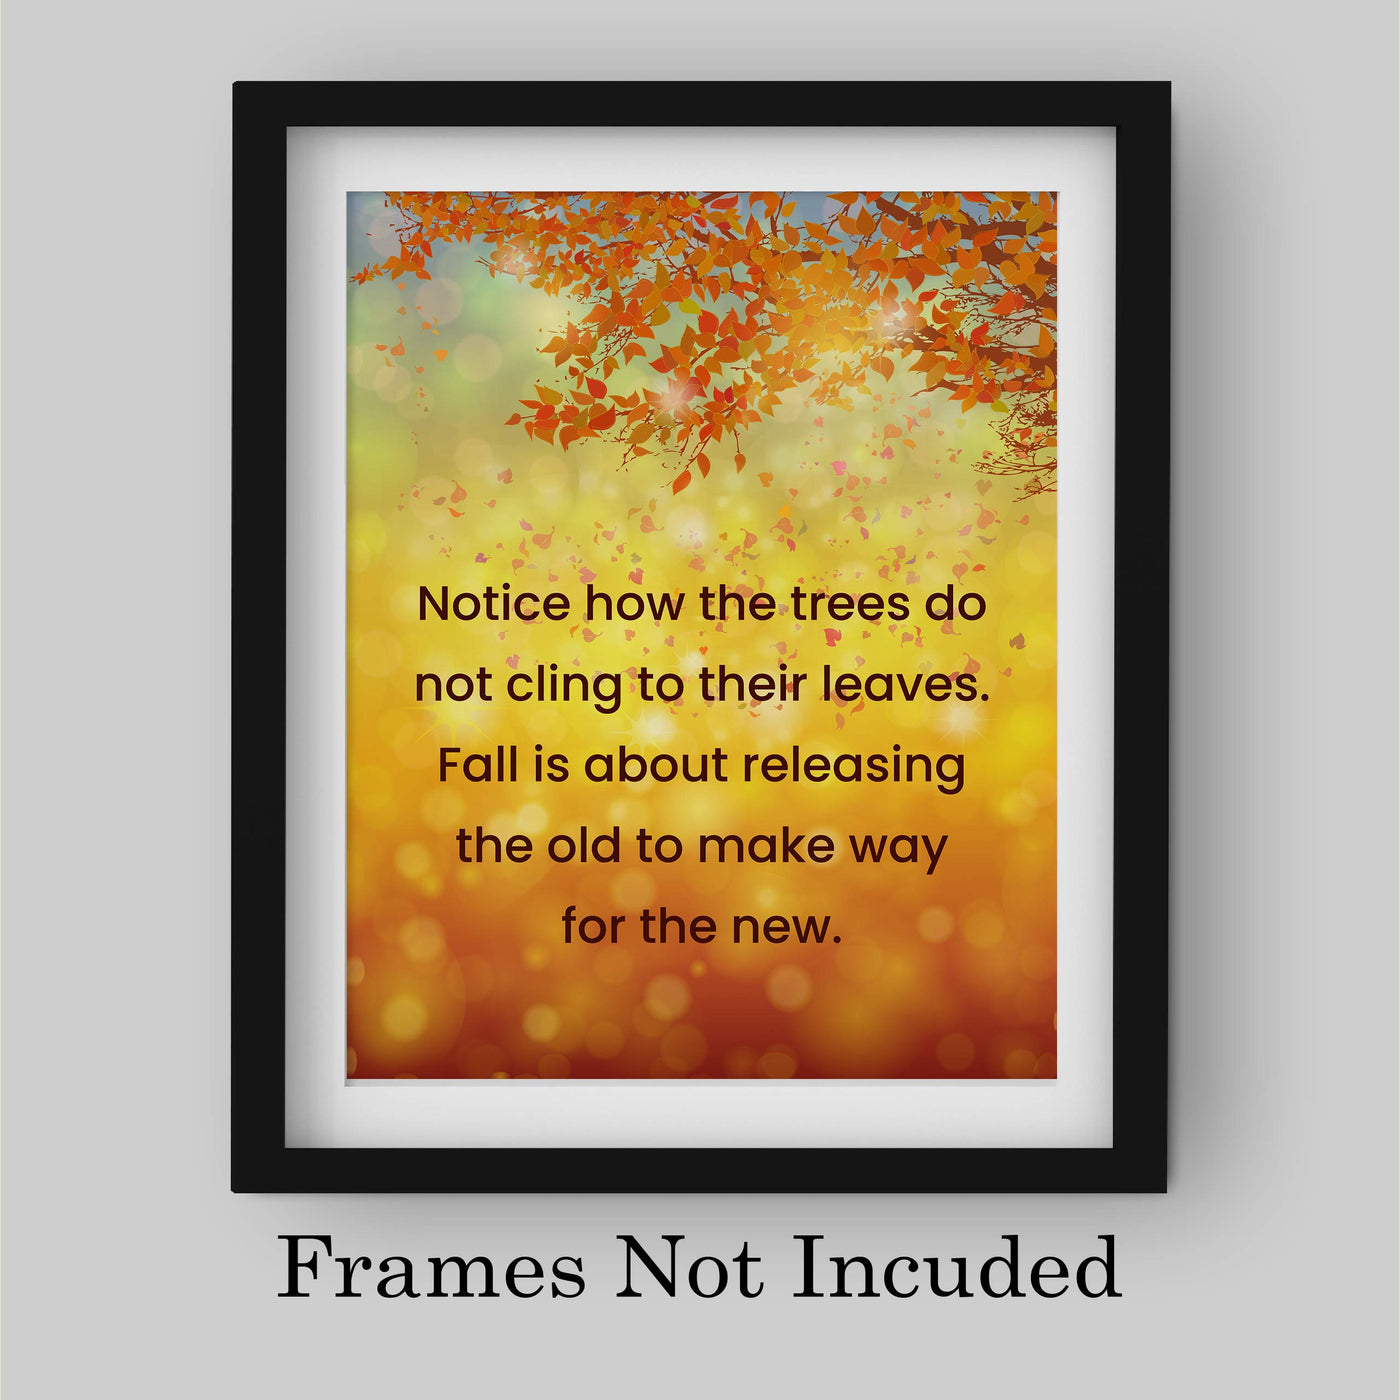 Fall Is About Releasing the Old to Make Way For the New Motivational Quotes Wall Art -8 x 10" Typographic Print w/Fall Leaves-Ready to Frame. Inspirational Decor for Home-Office-Studio-School!